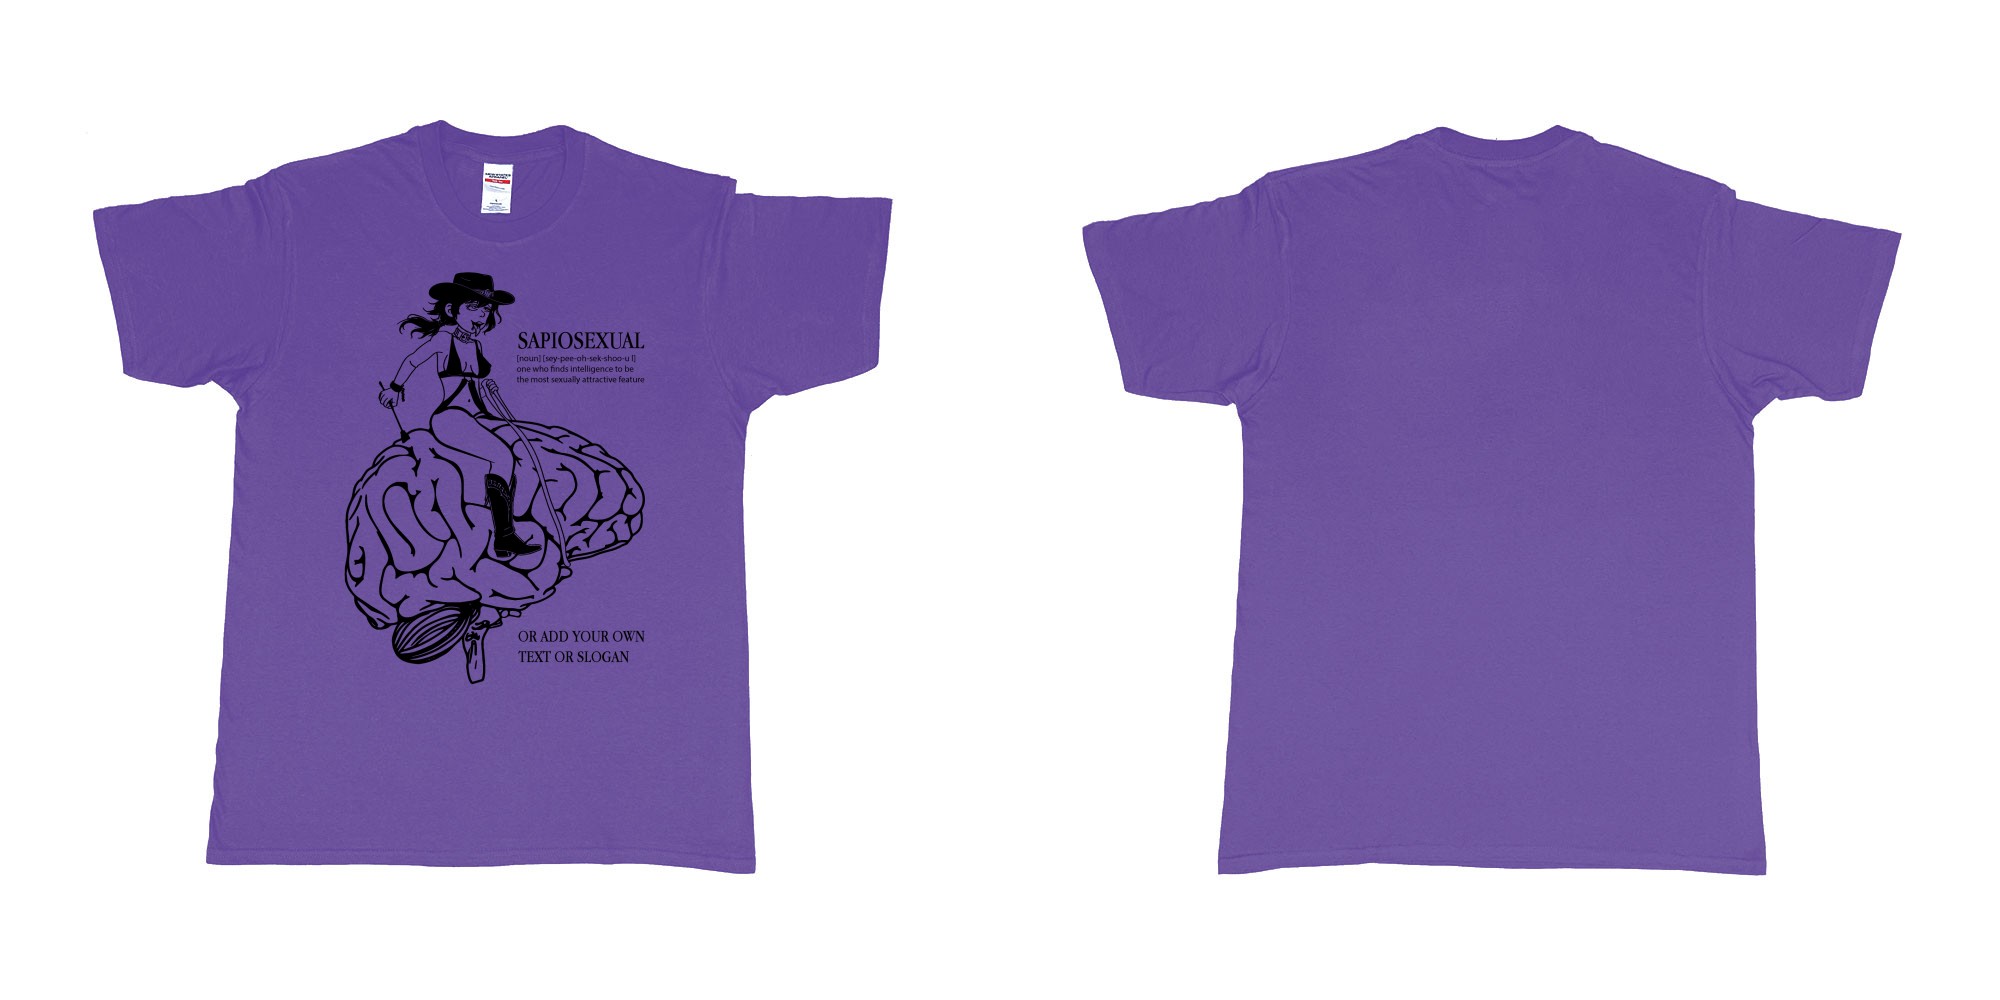 Custom tshirt design sapiosexual cowgirl riding brain in fabric color purple choice your own text made in Bali by The Pirate Way